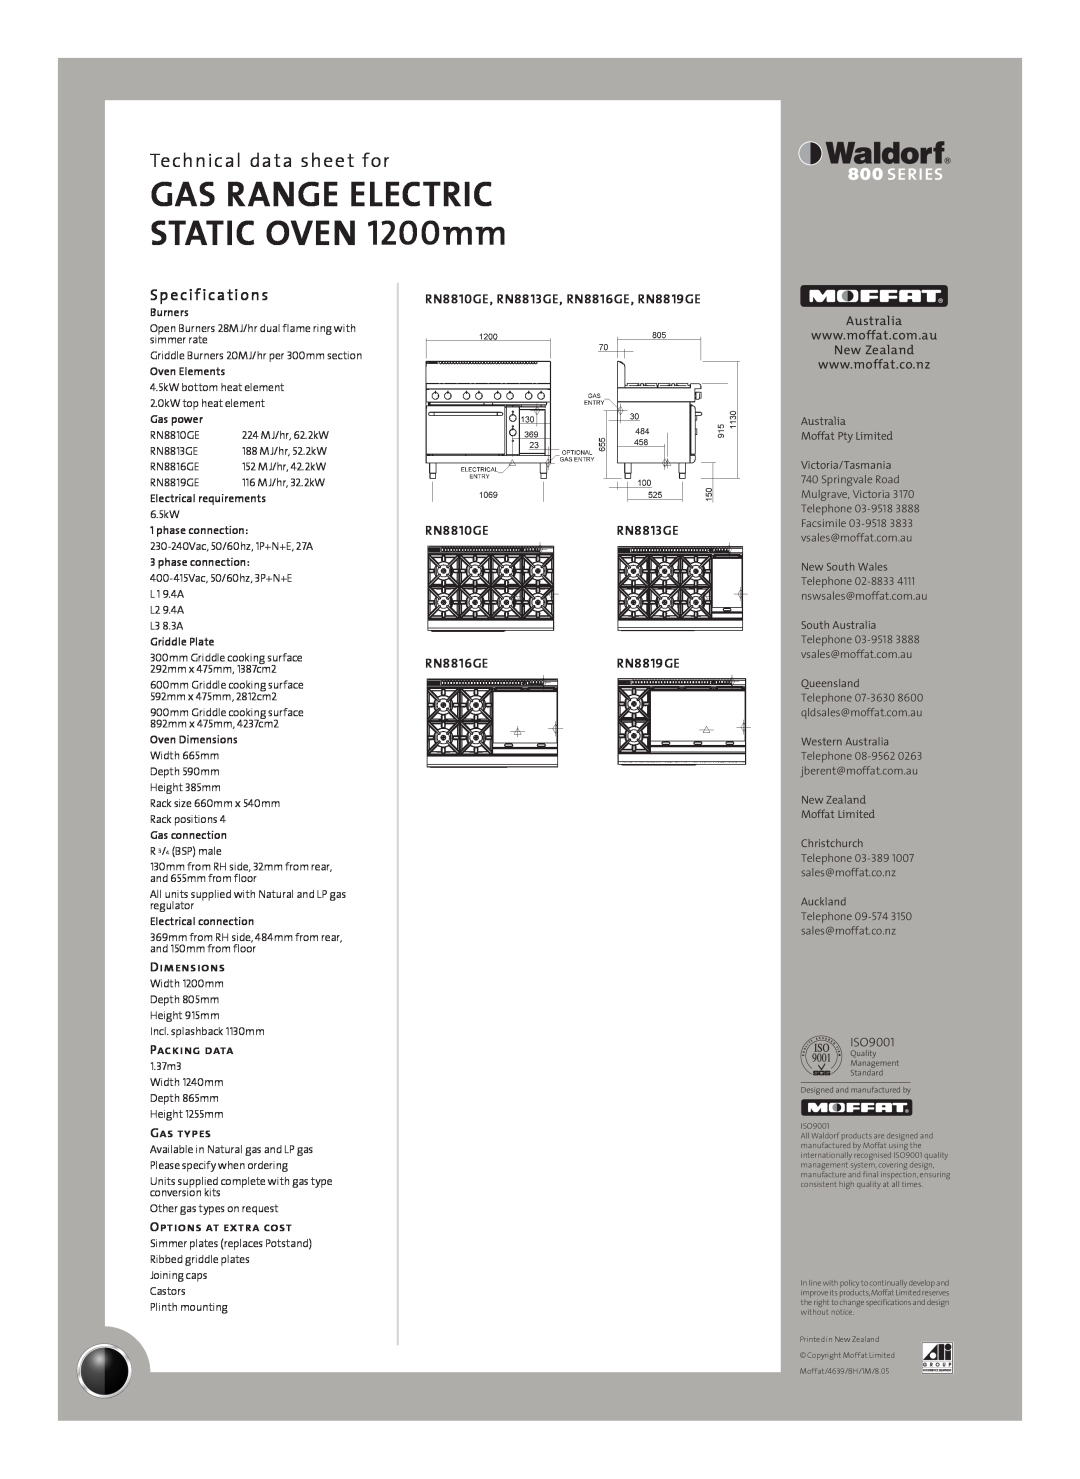 Moffat RN8816GE Sp e cif ications, GAS RANGE ELECTRIC STATIC OVEN 1200mm, Technical data sheet for, Dimensions, Gas types 